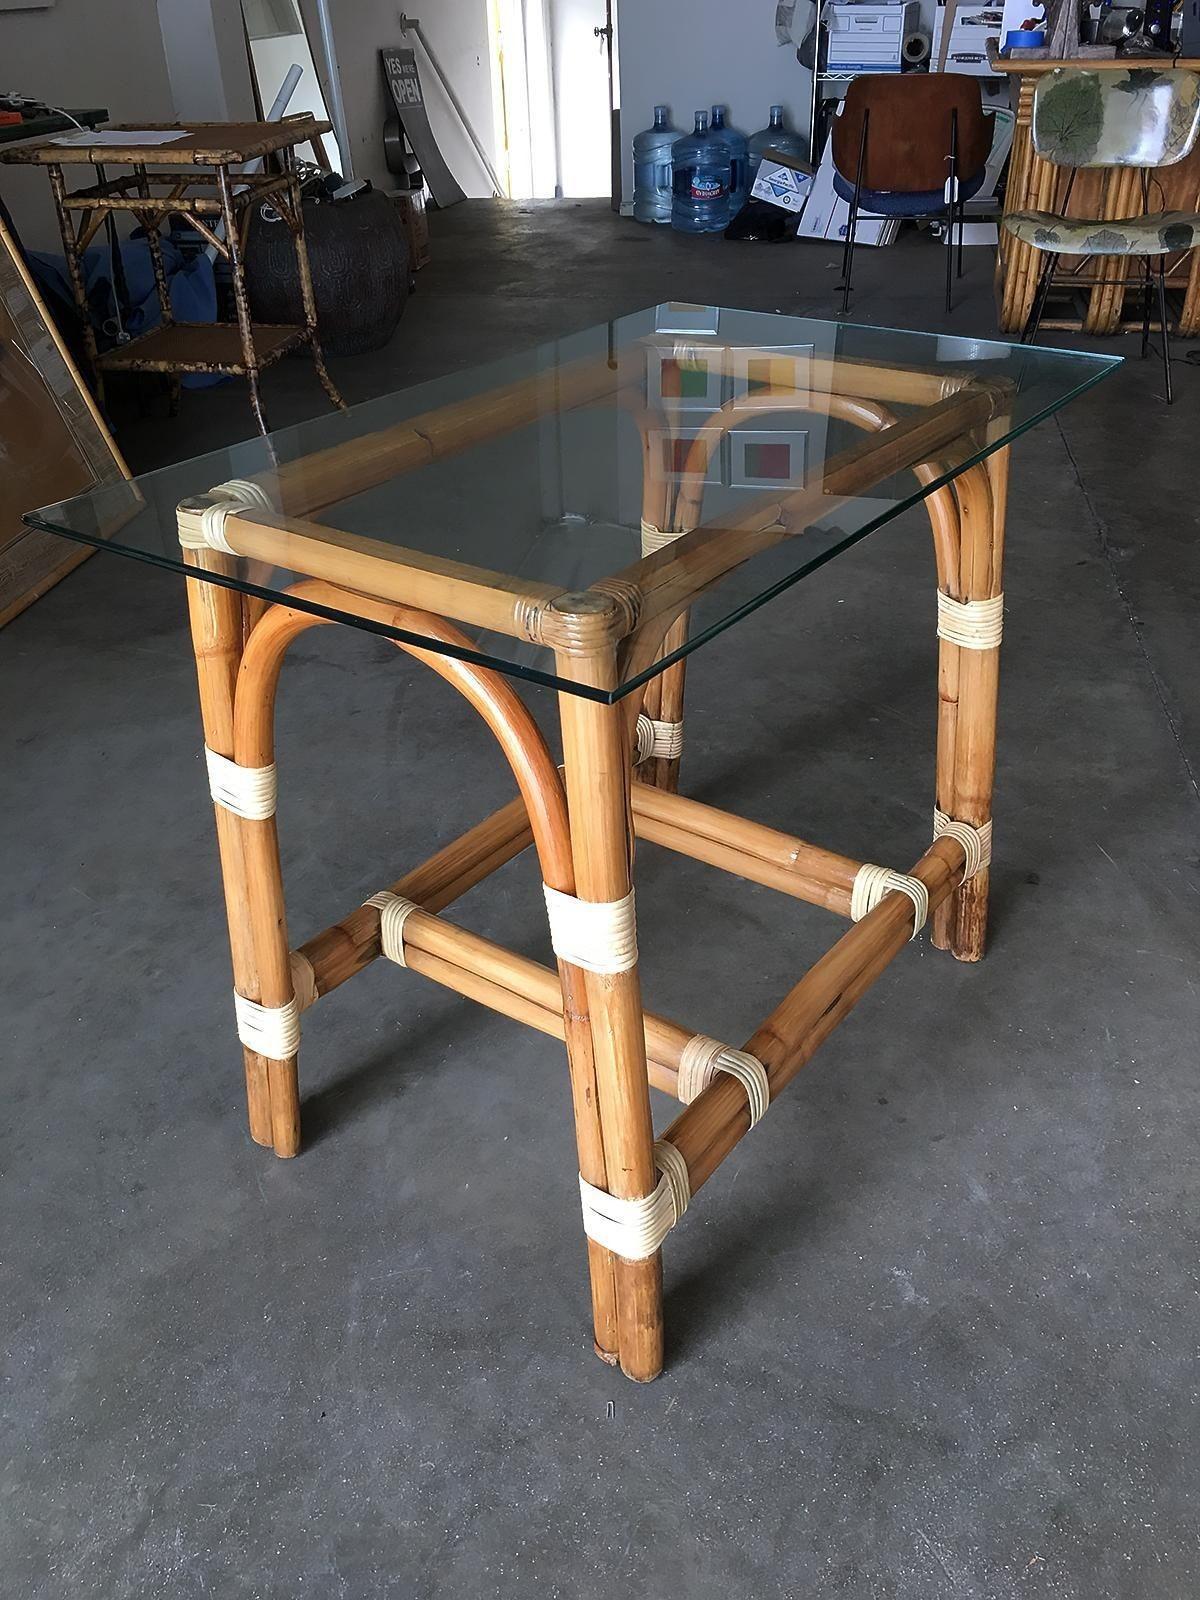 Restored rattan side table with a glass top. The table features wicker-wrapped accents with unique bent-pressed legs.

1950, United States

We only purchase and sell only the best and finest rattan furniture made by the best and most well-known